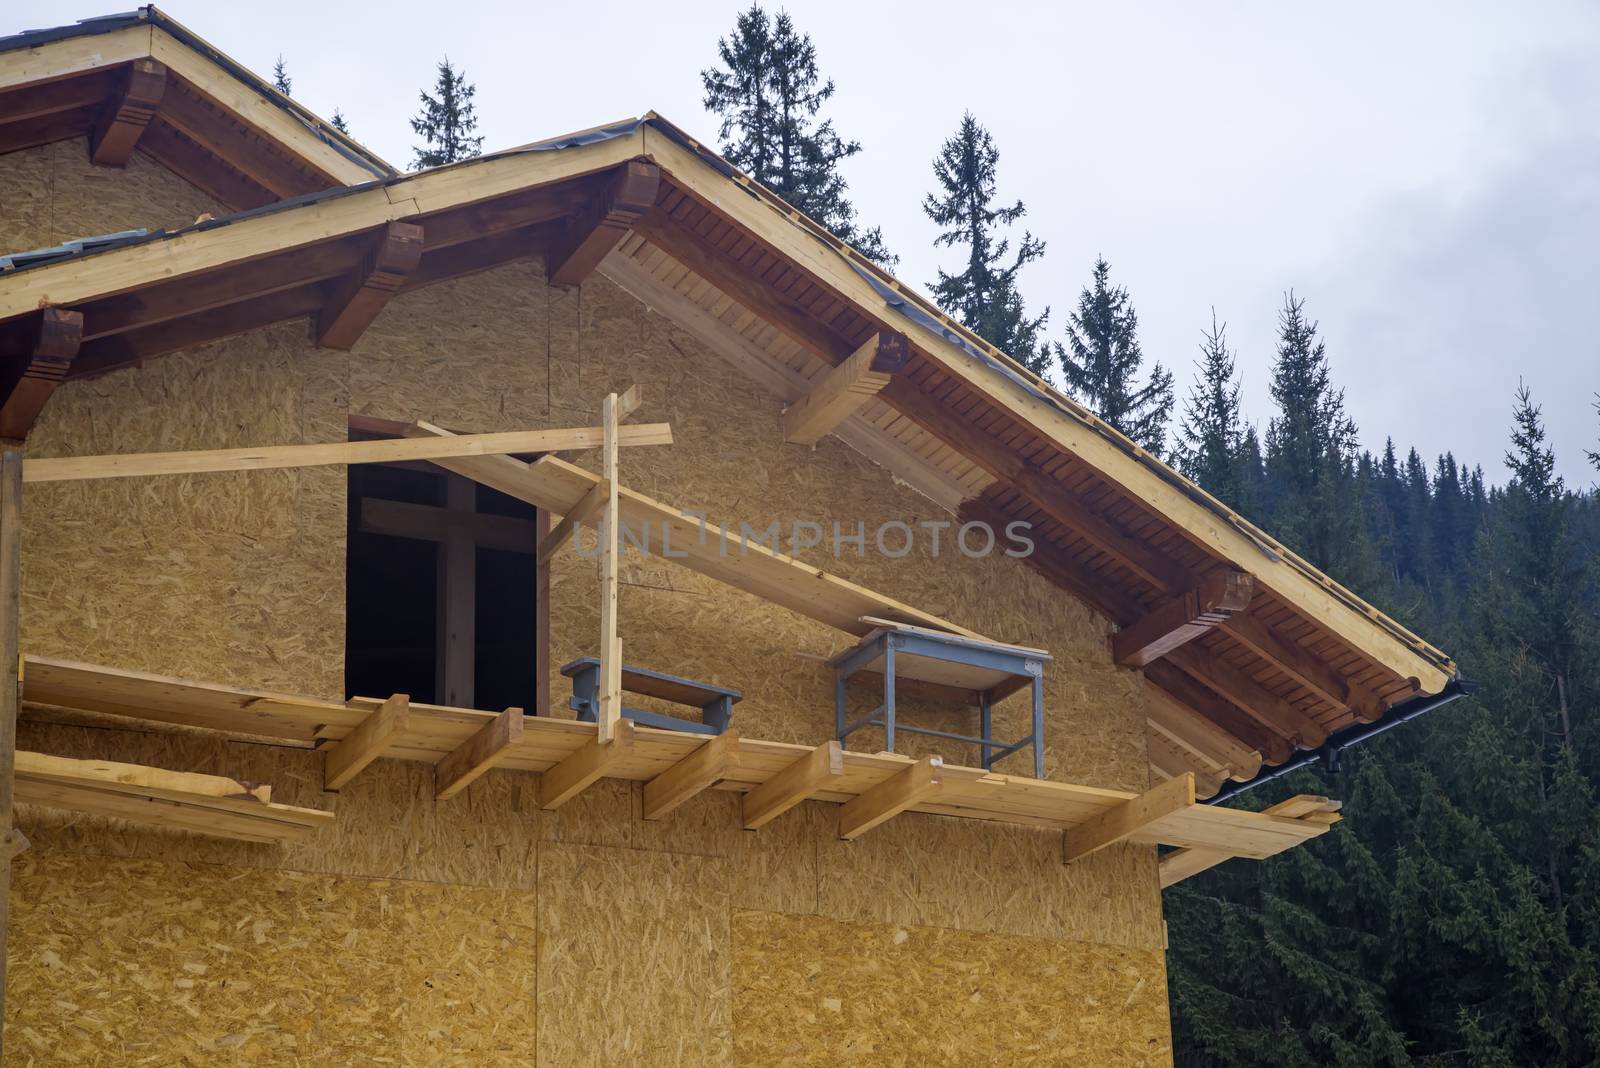 Wooden chalet construction by savcoco